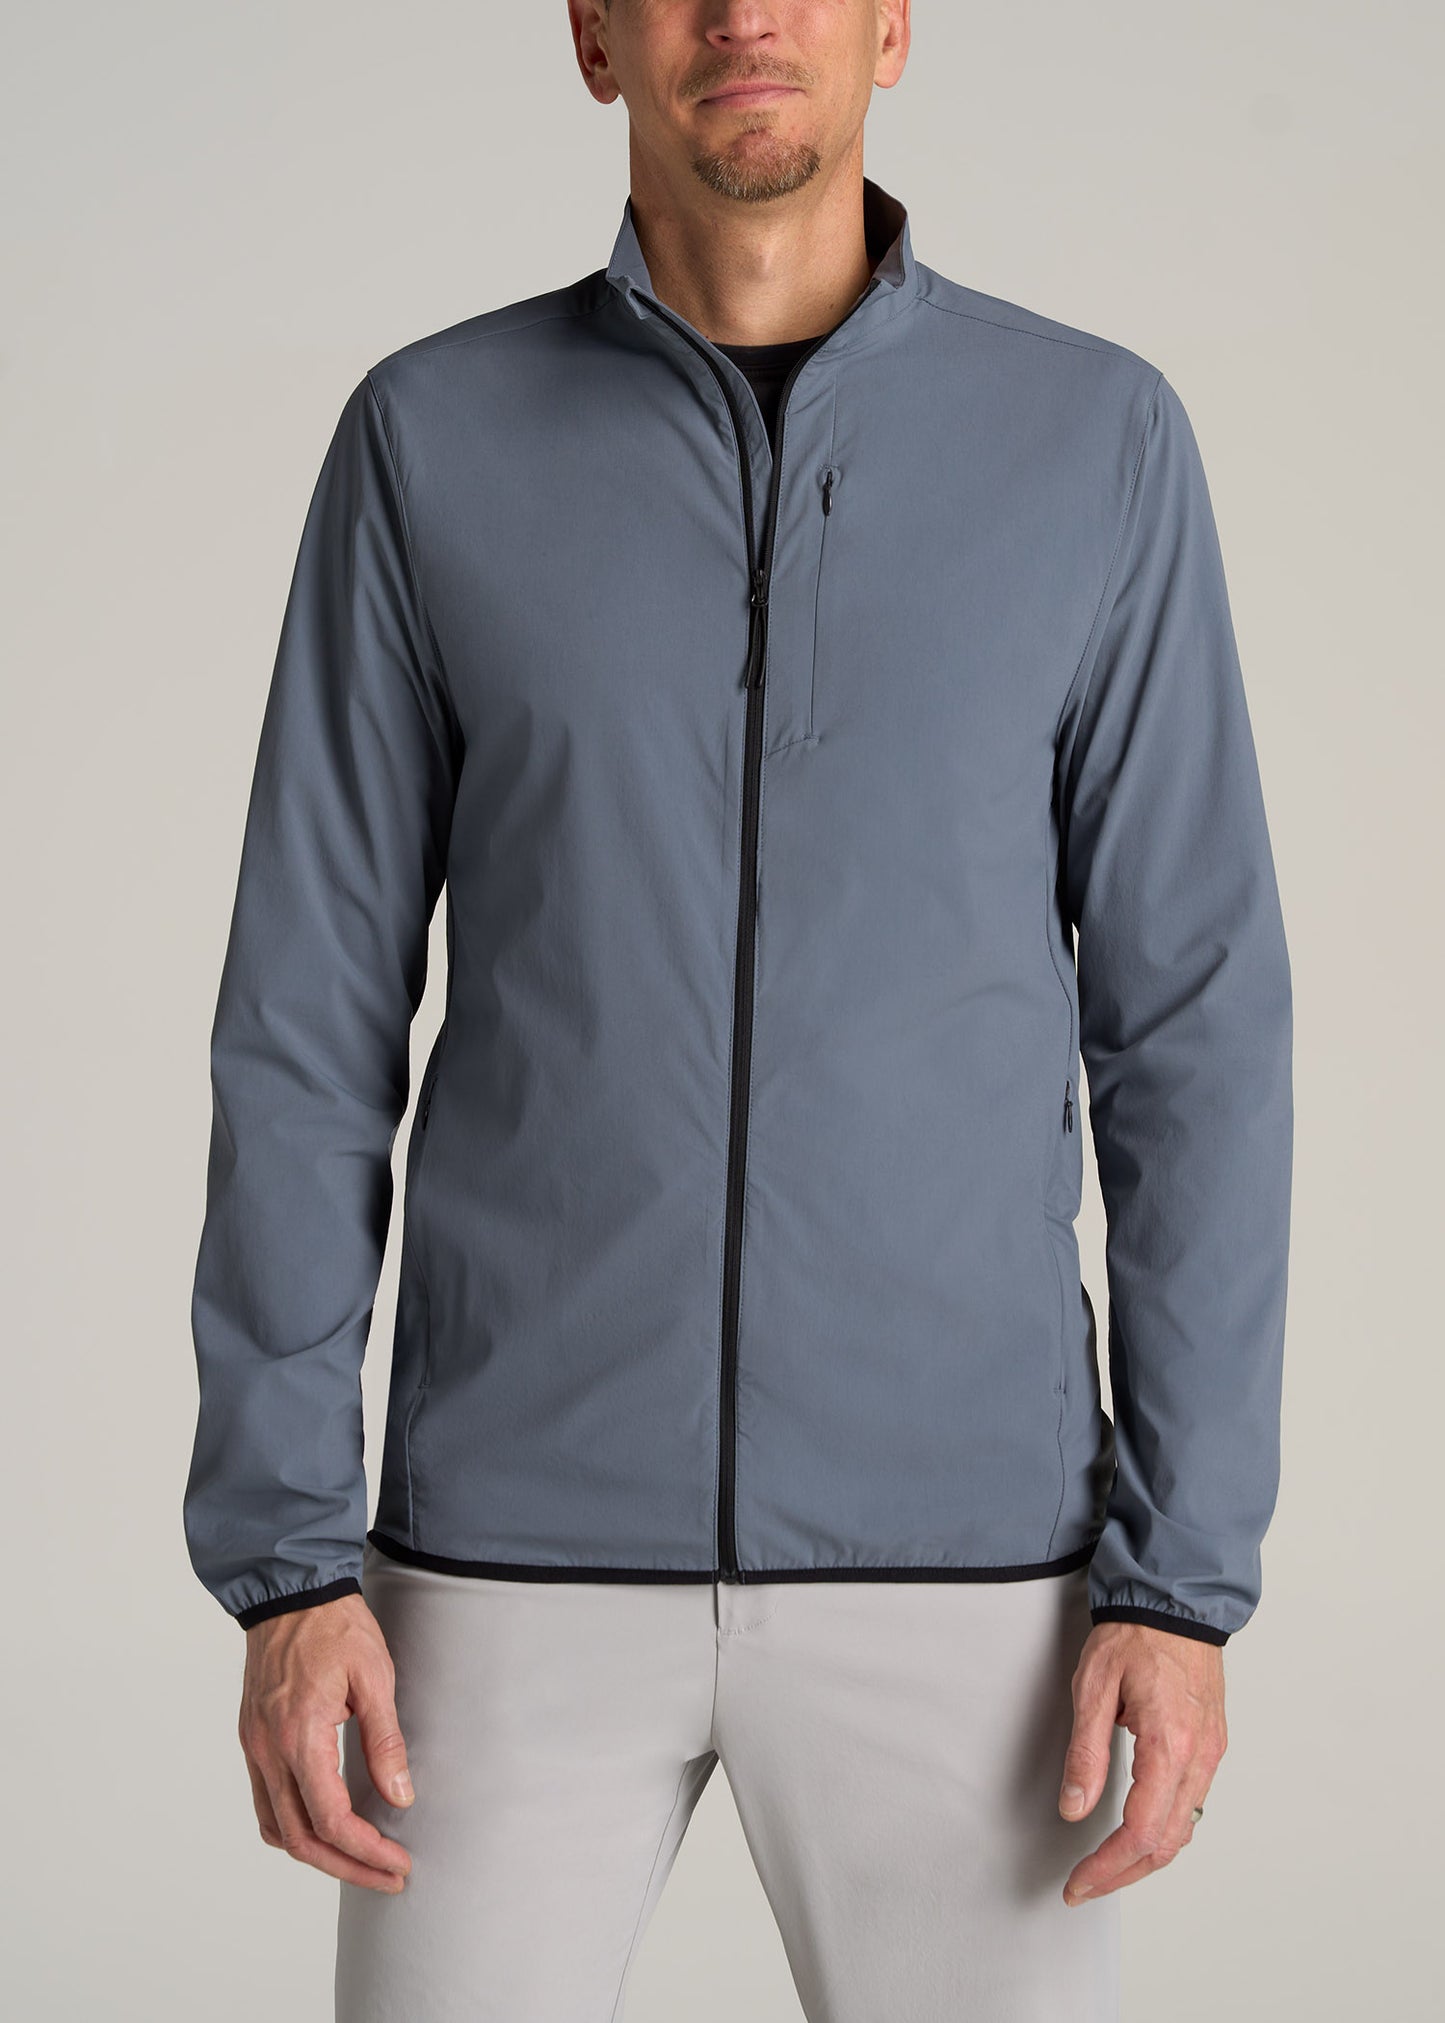 A tall man wearing American Tall's Tall Men's Softshell Jacket for Outdoor Training in Smoky Blue.